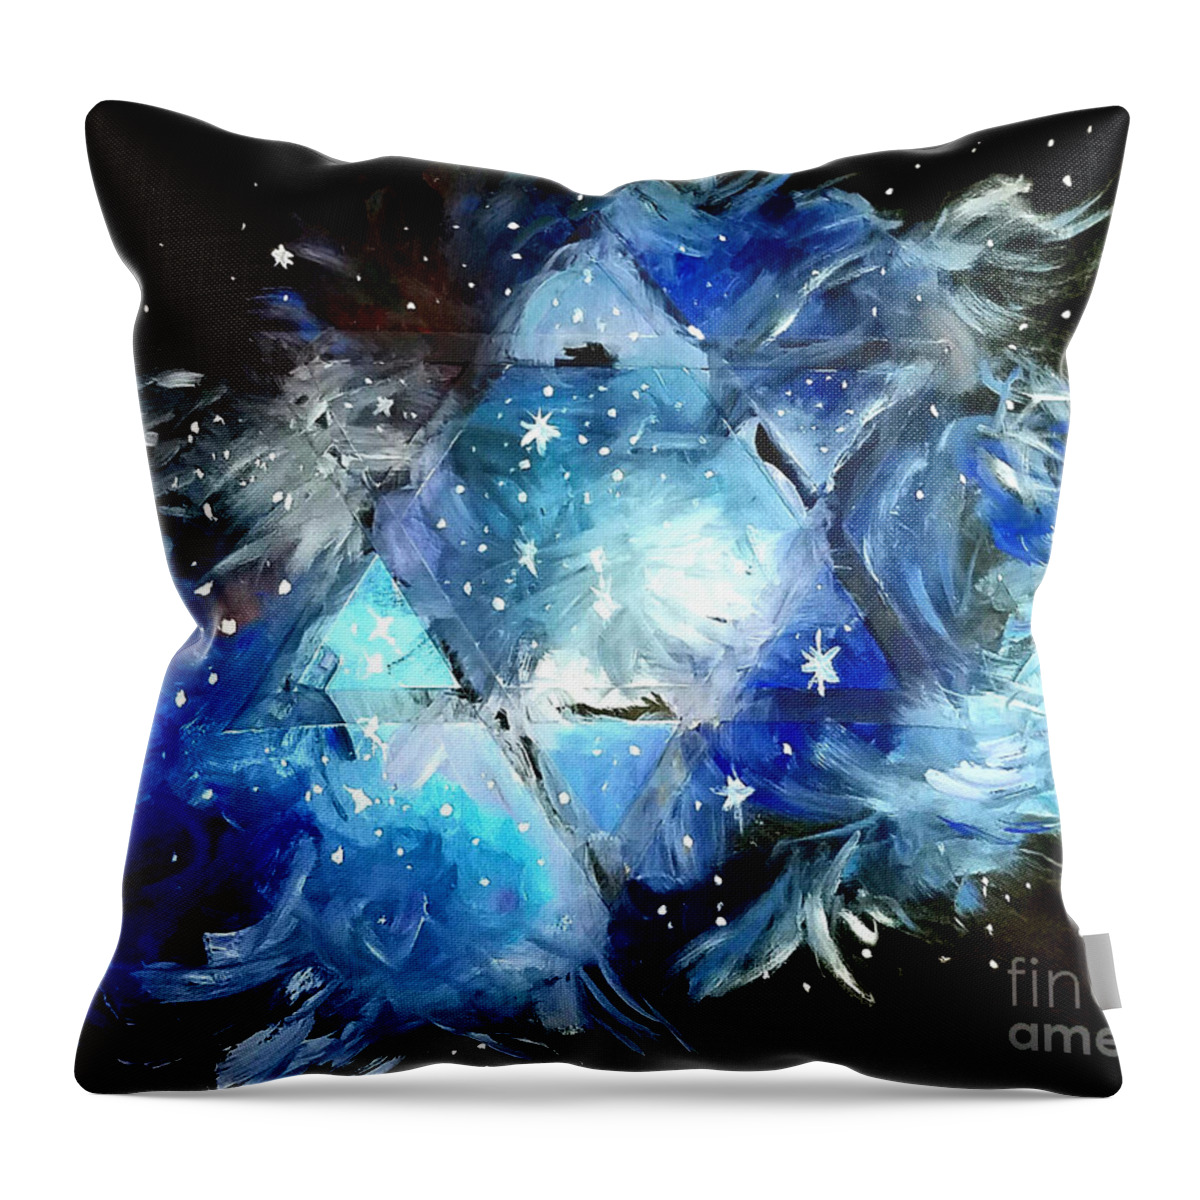 Stars Of David Throw Pillow featuring the digital art Stars Of David by Curtis Sikes